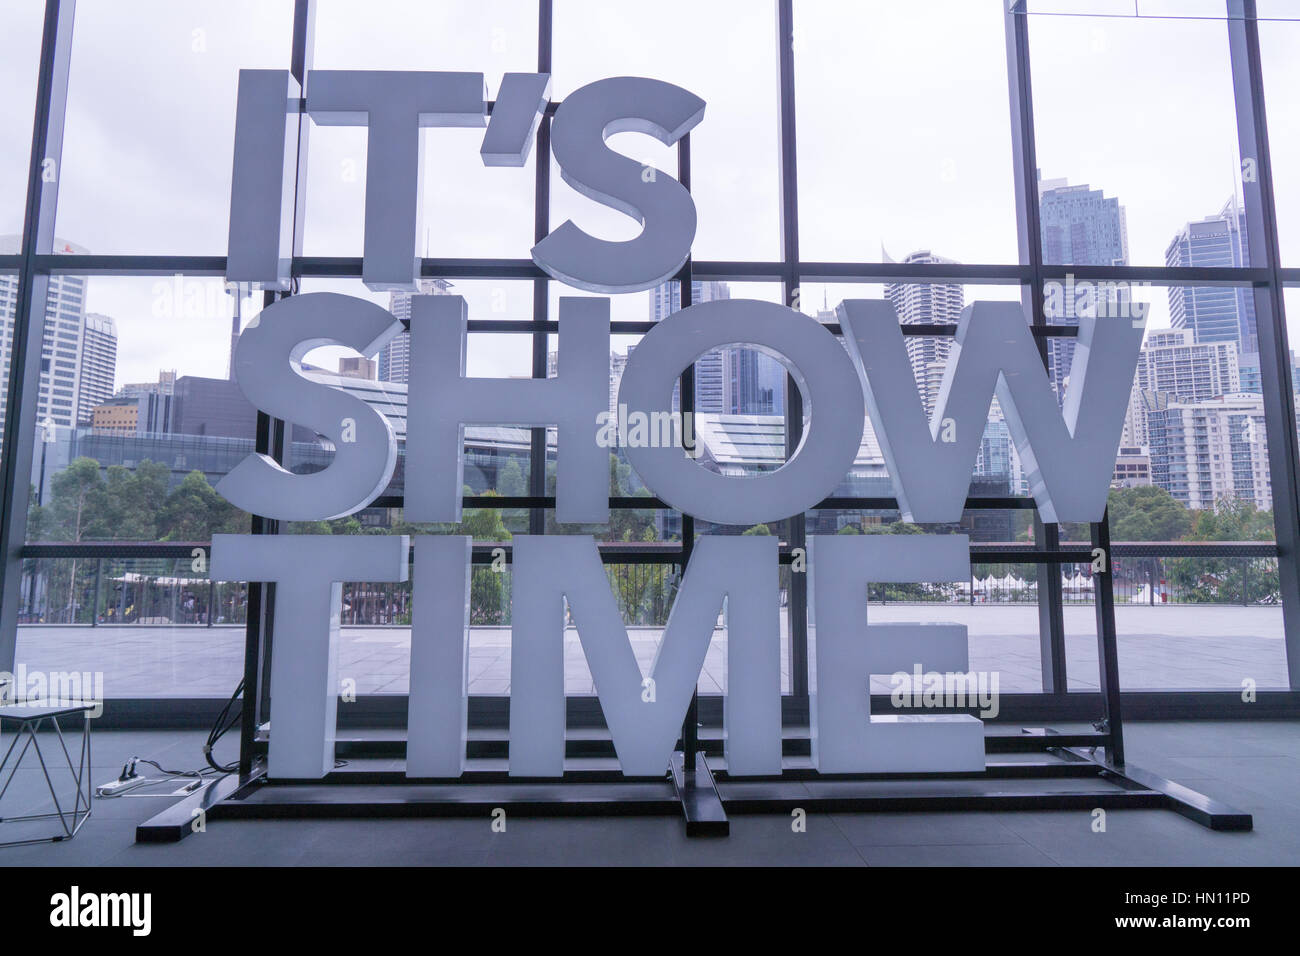 An 'Its Showtime' 3D sign at the ICC Centre, Sydney Stock Photo